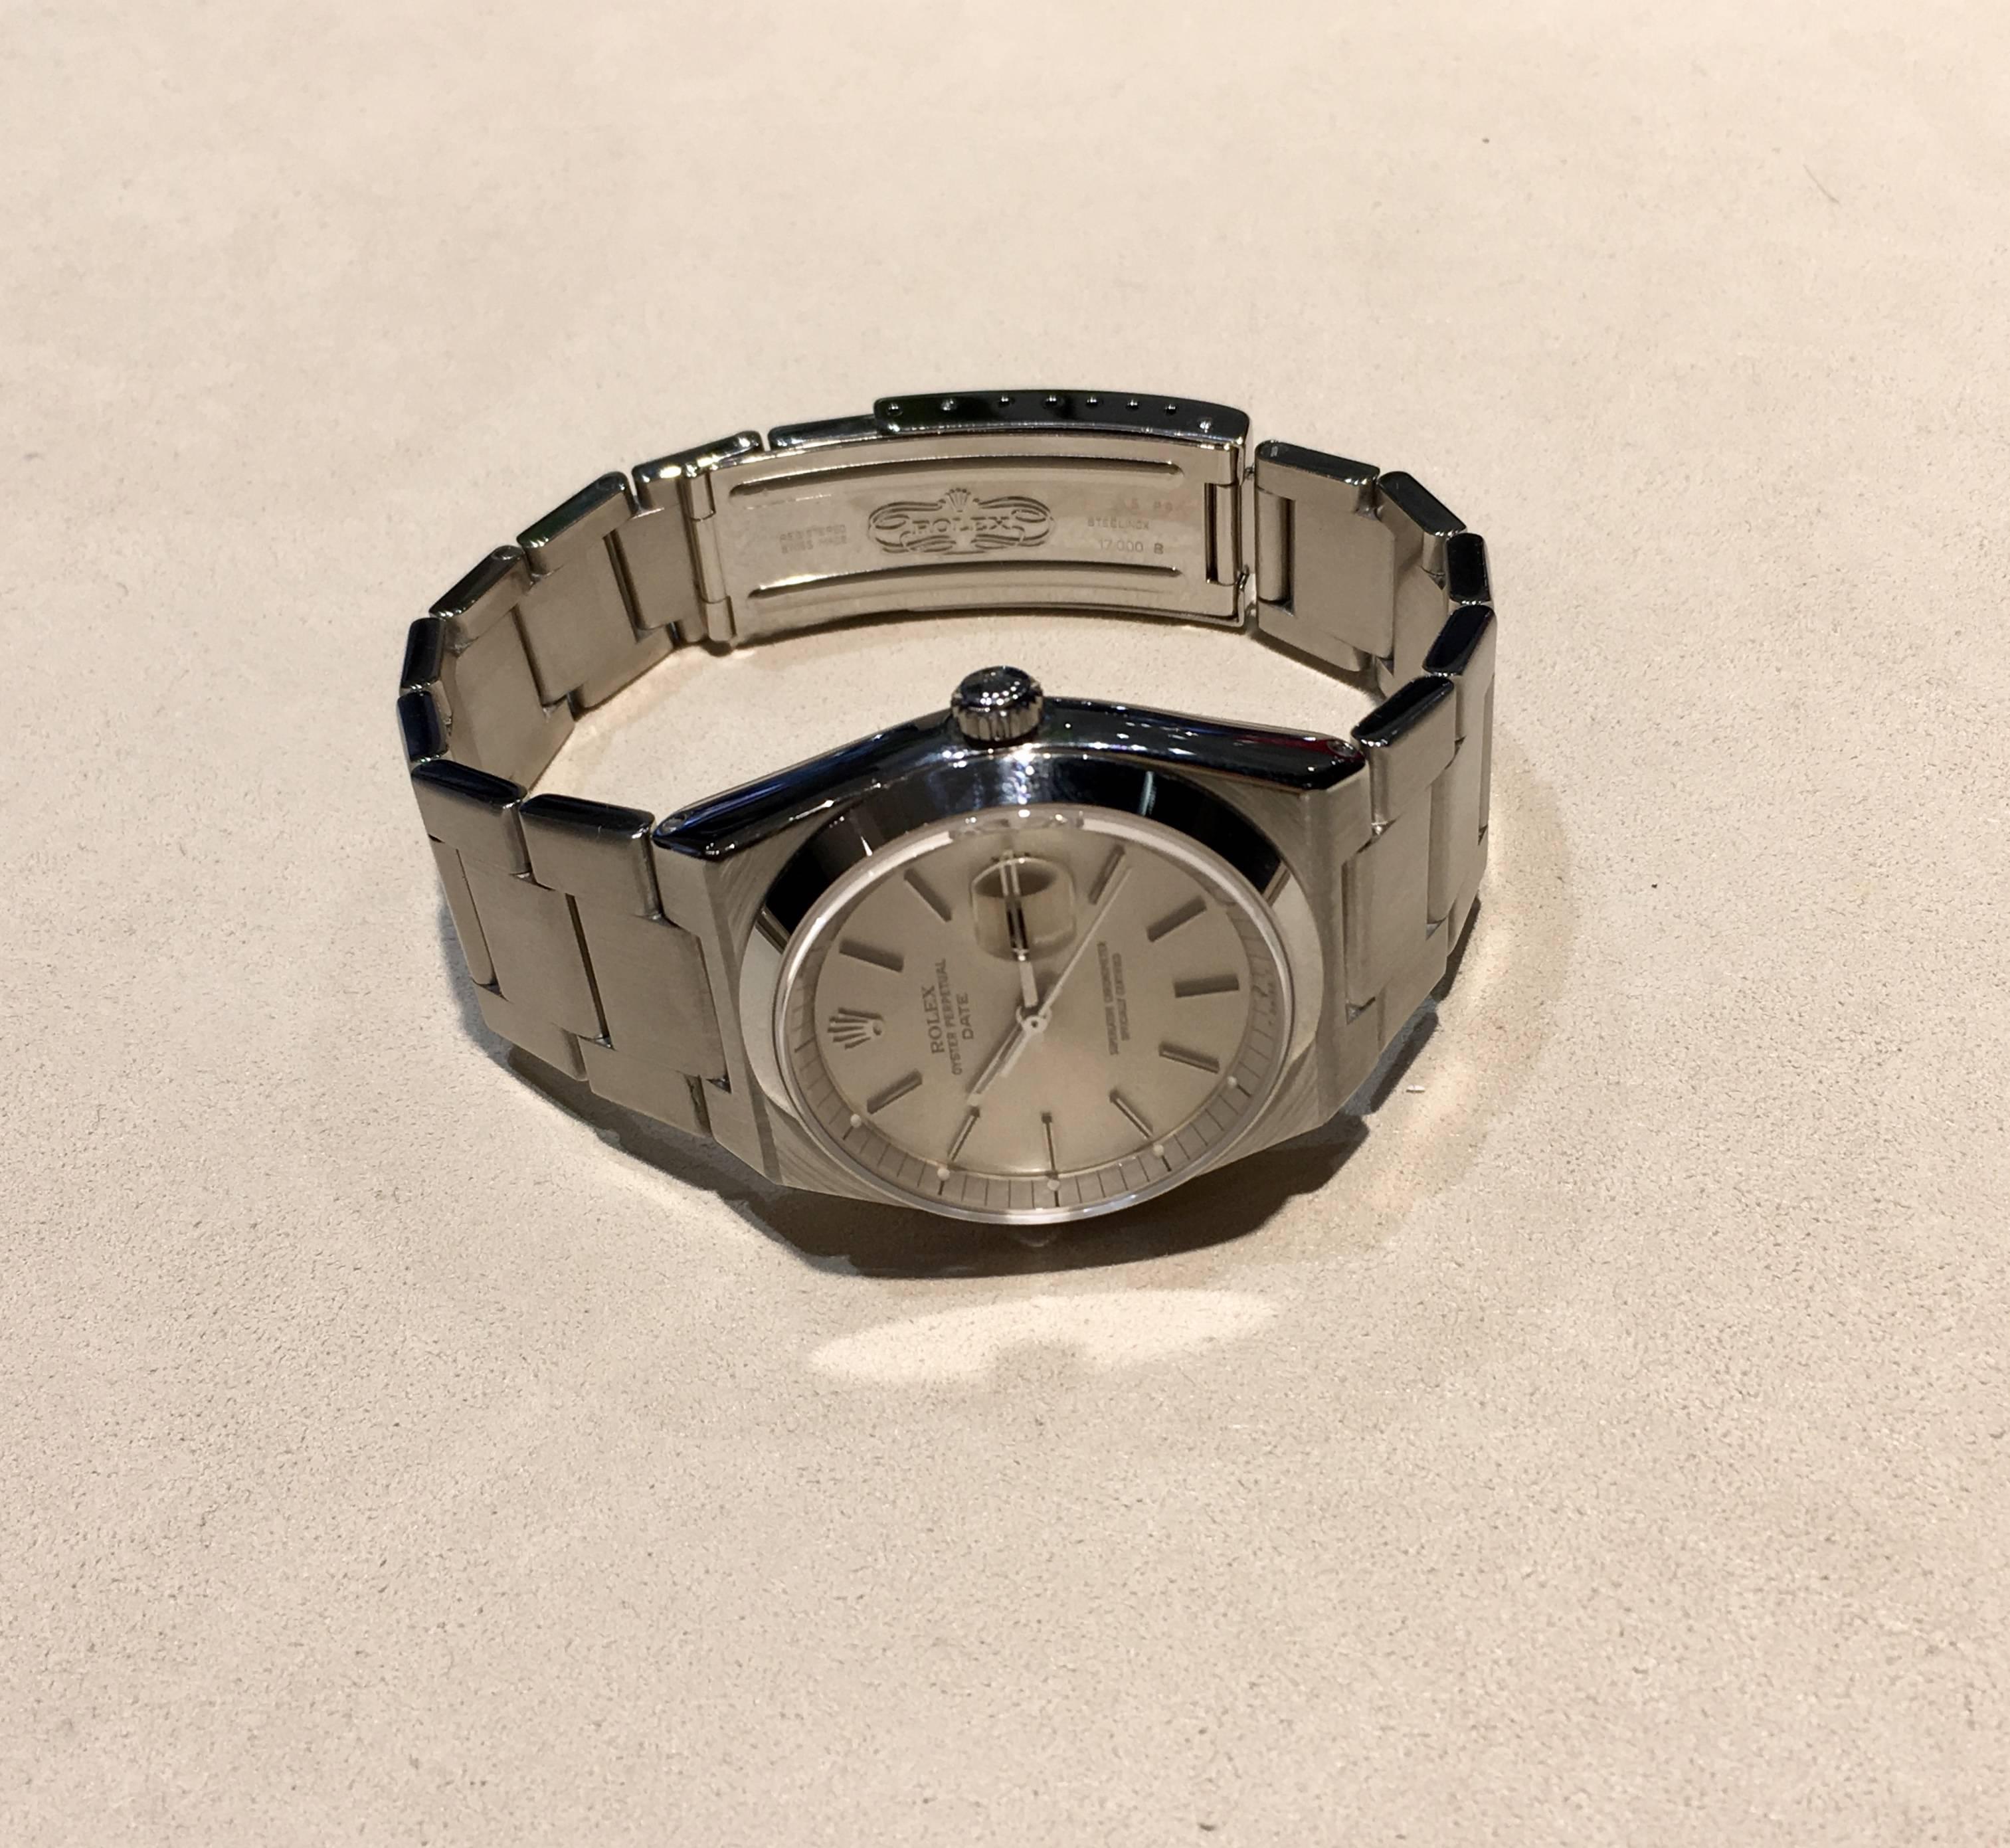 Rolex Stainless Steel Datejust Oyster Perpetual wristwatch Ref 1530, circa 1976 In New Condition For Sale In Ottawa, Ontario